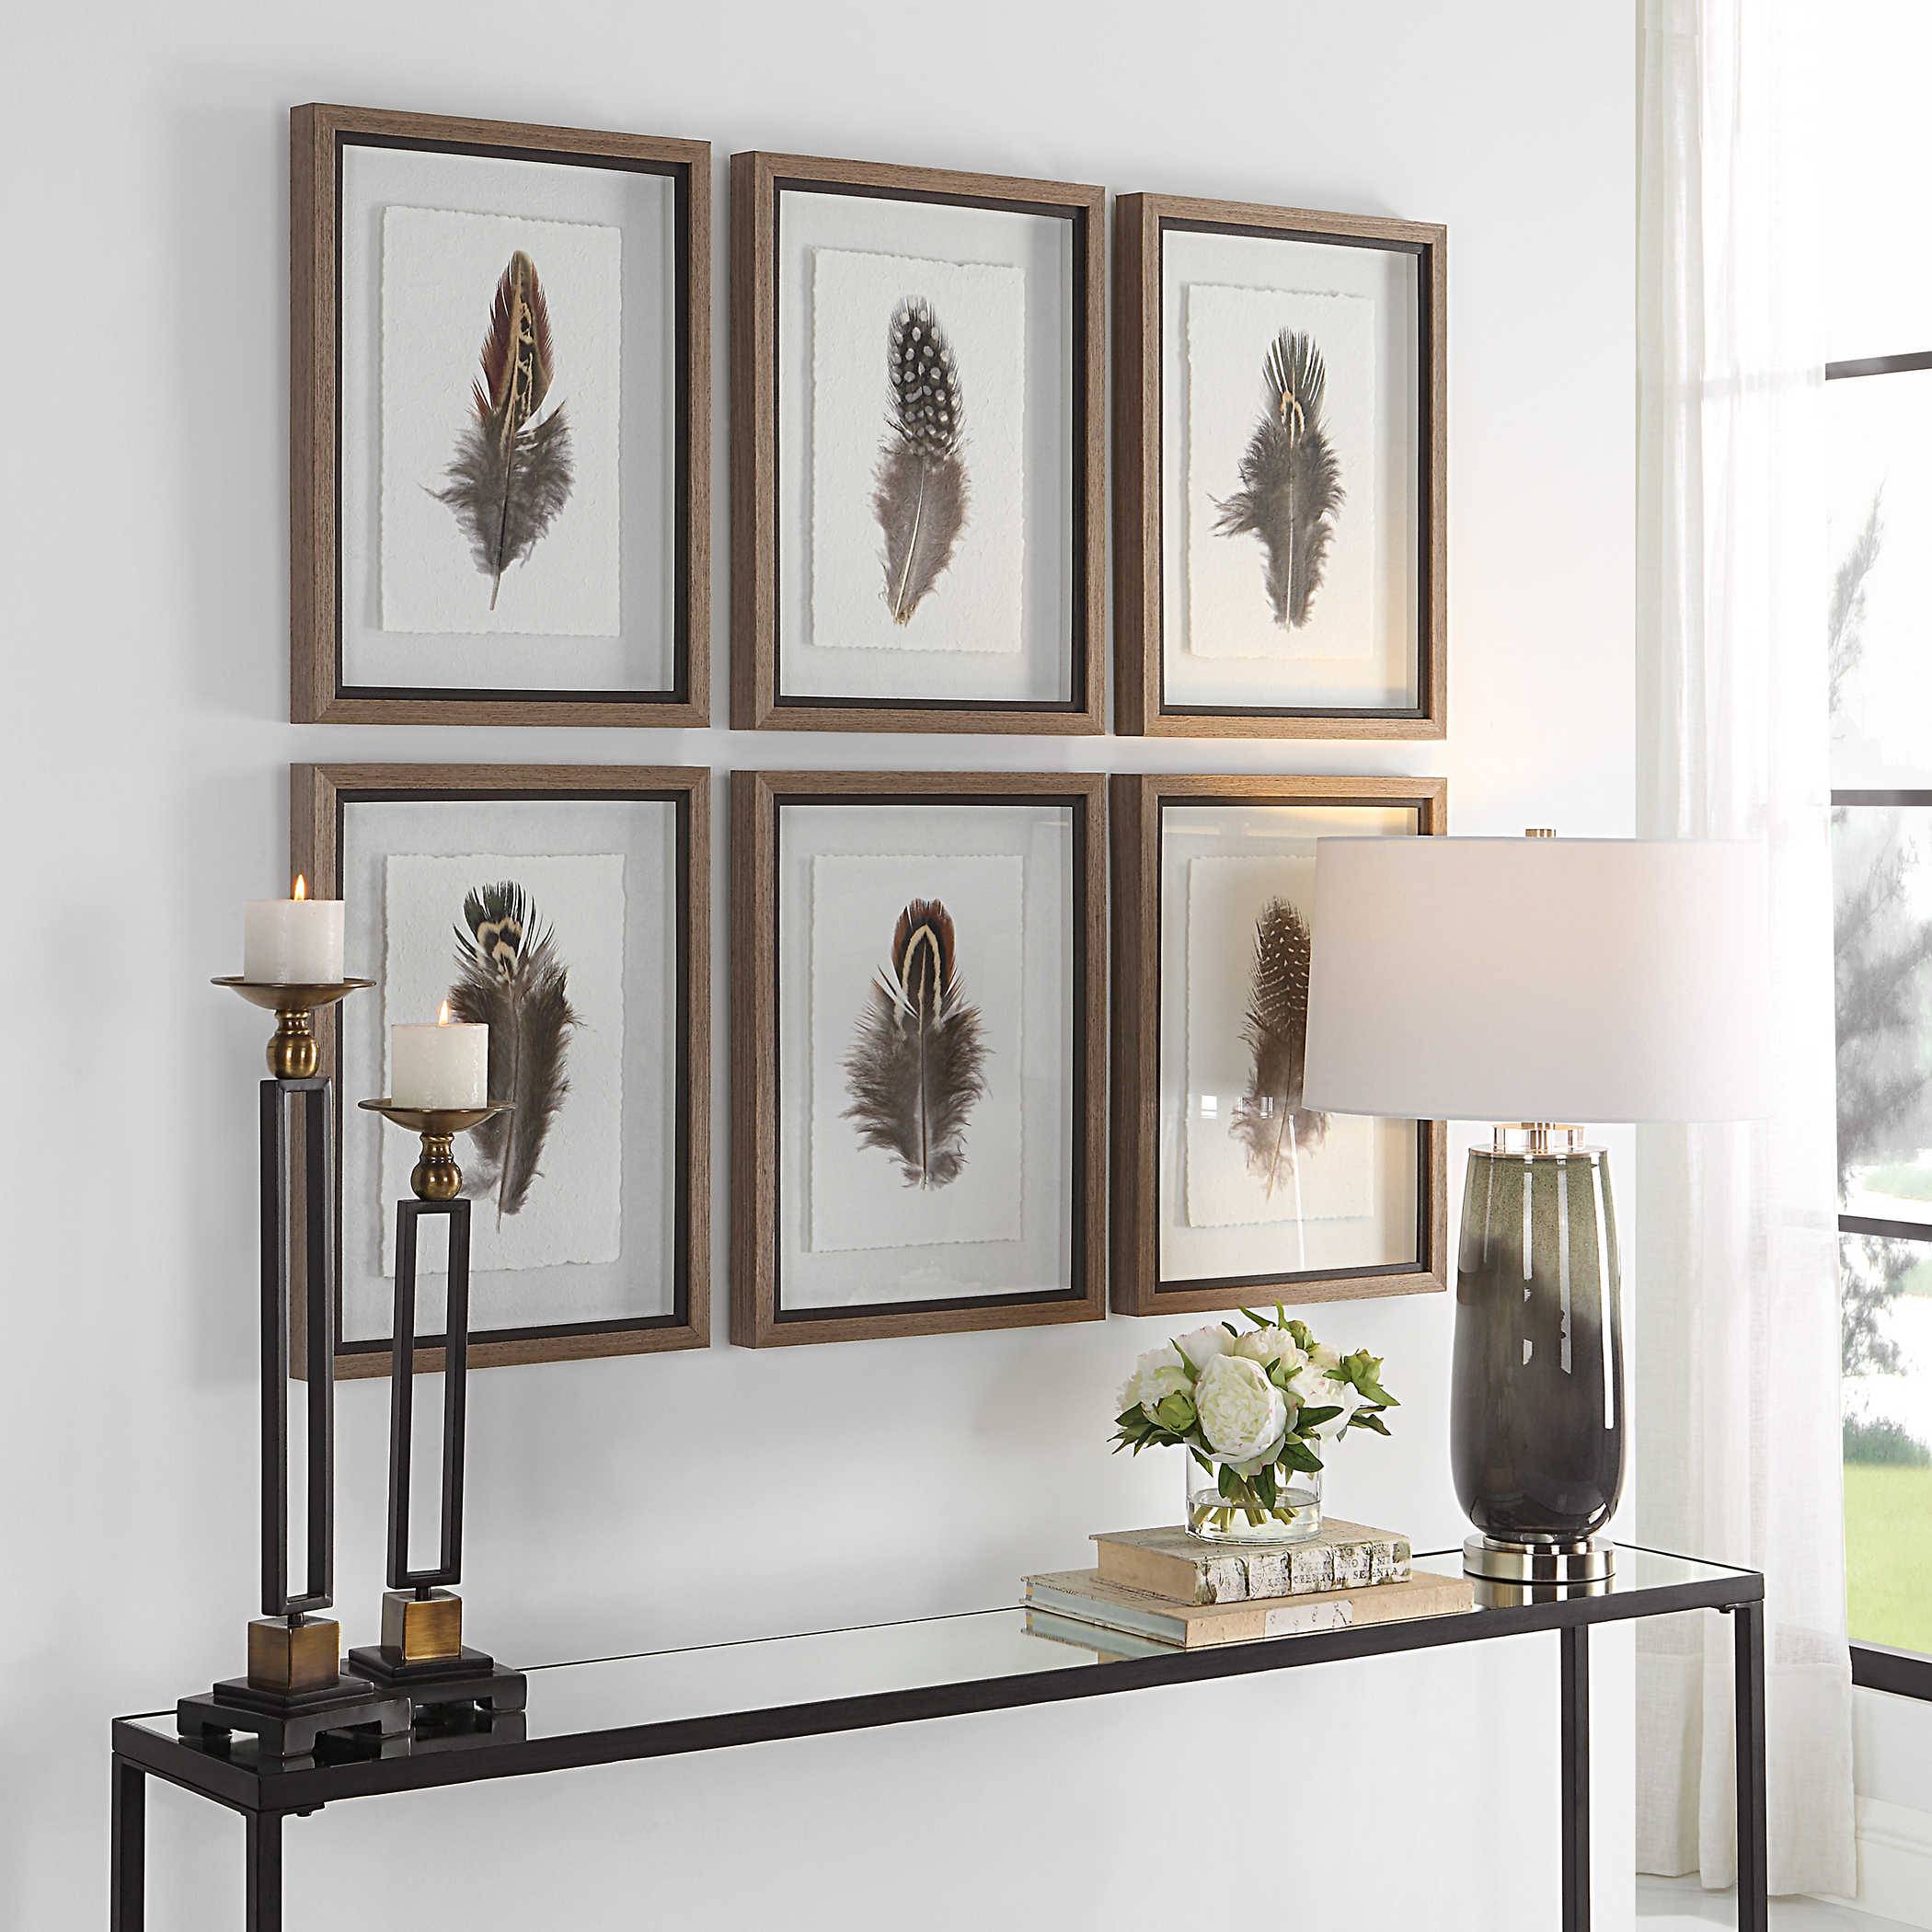 Uttermost Birds Of A Feather Framed Prints, S/6 Décor/Home Accent Uttermost   